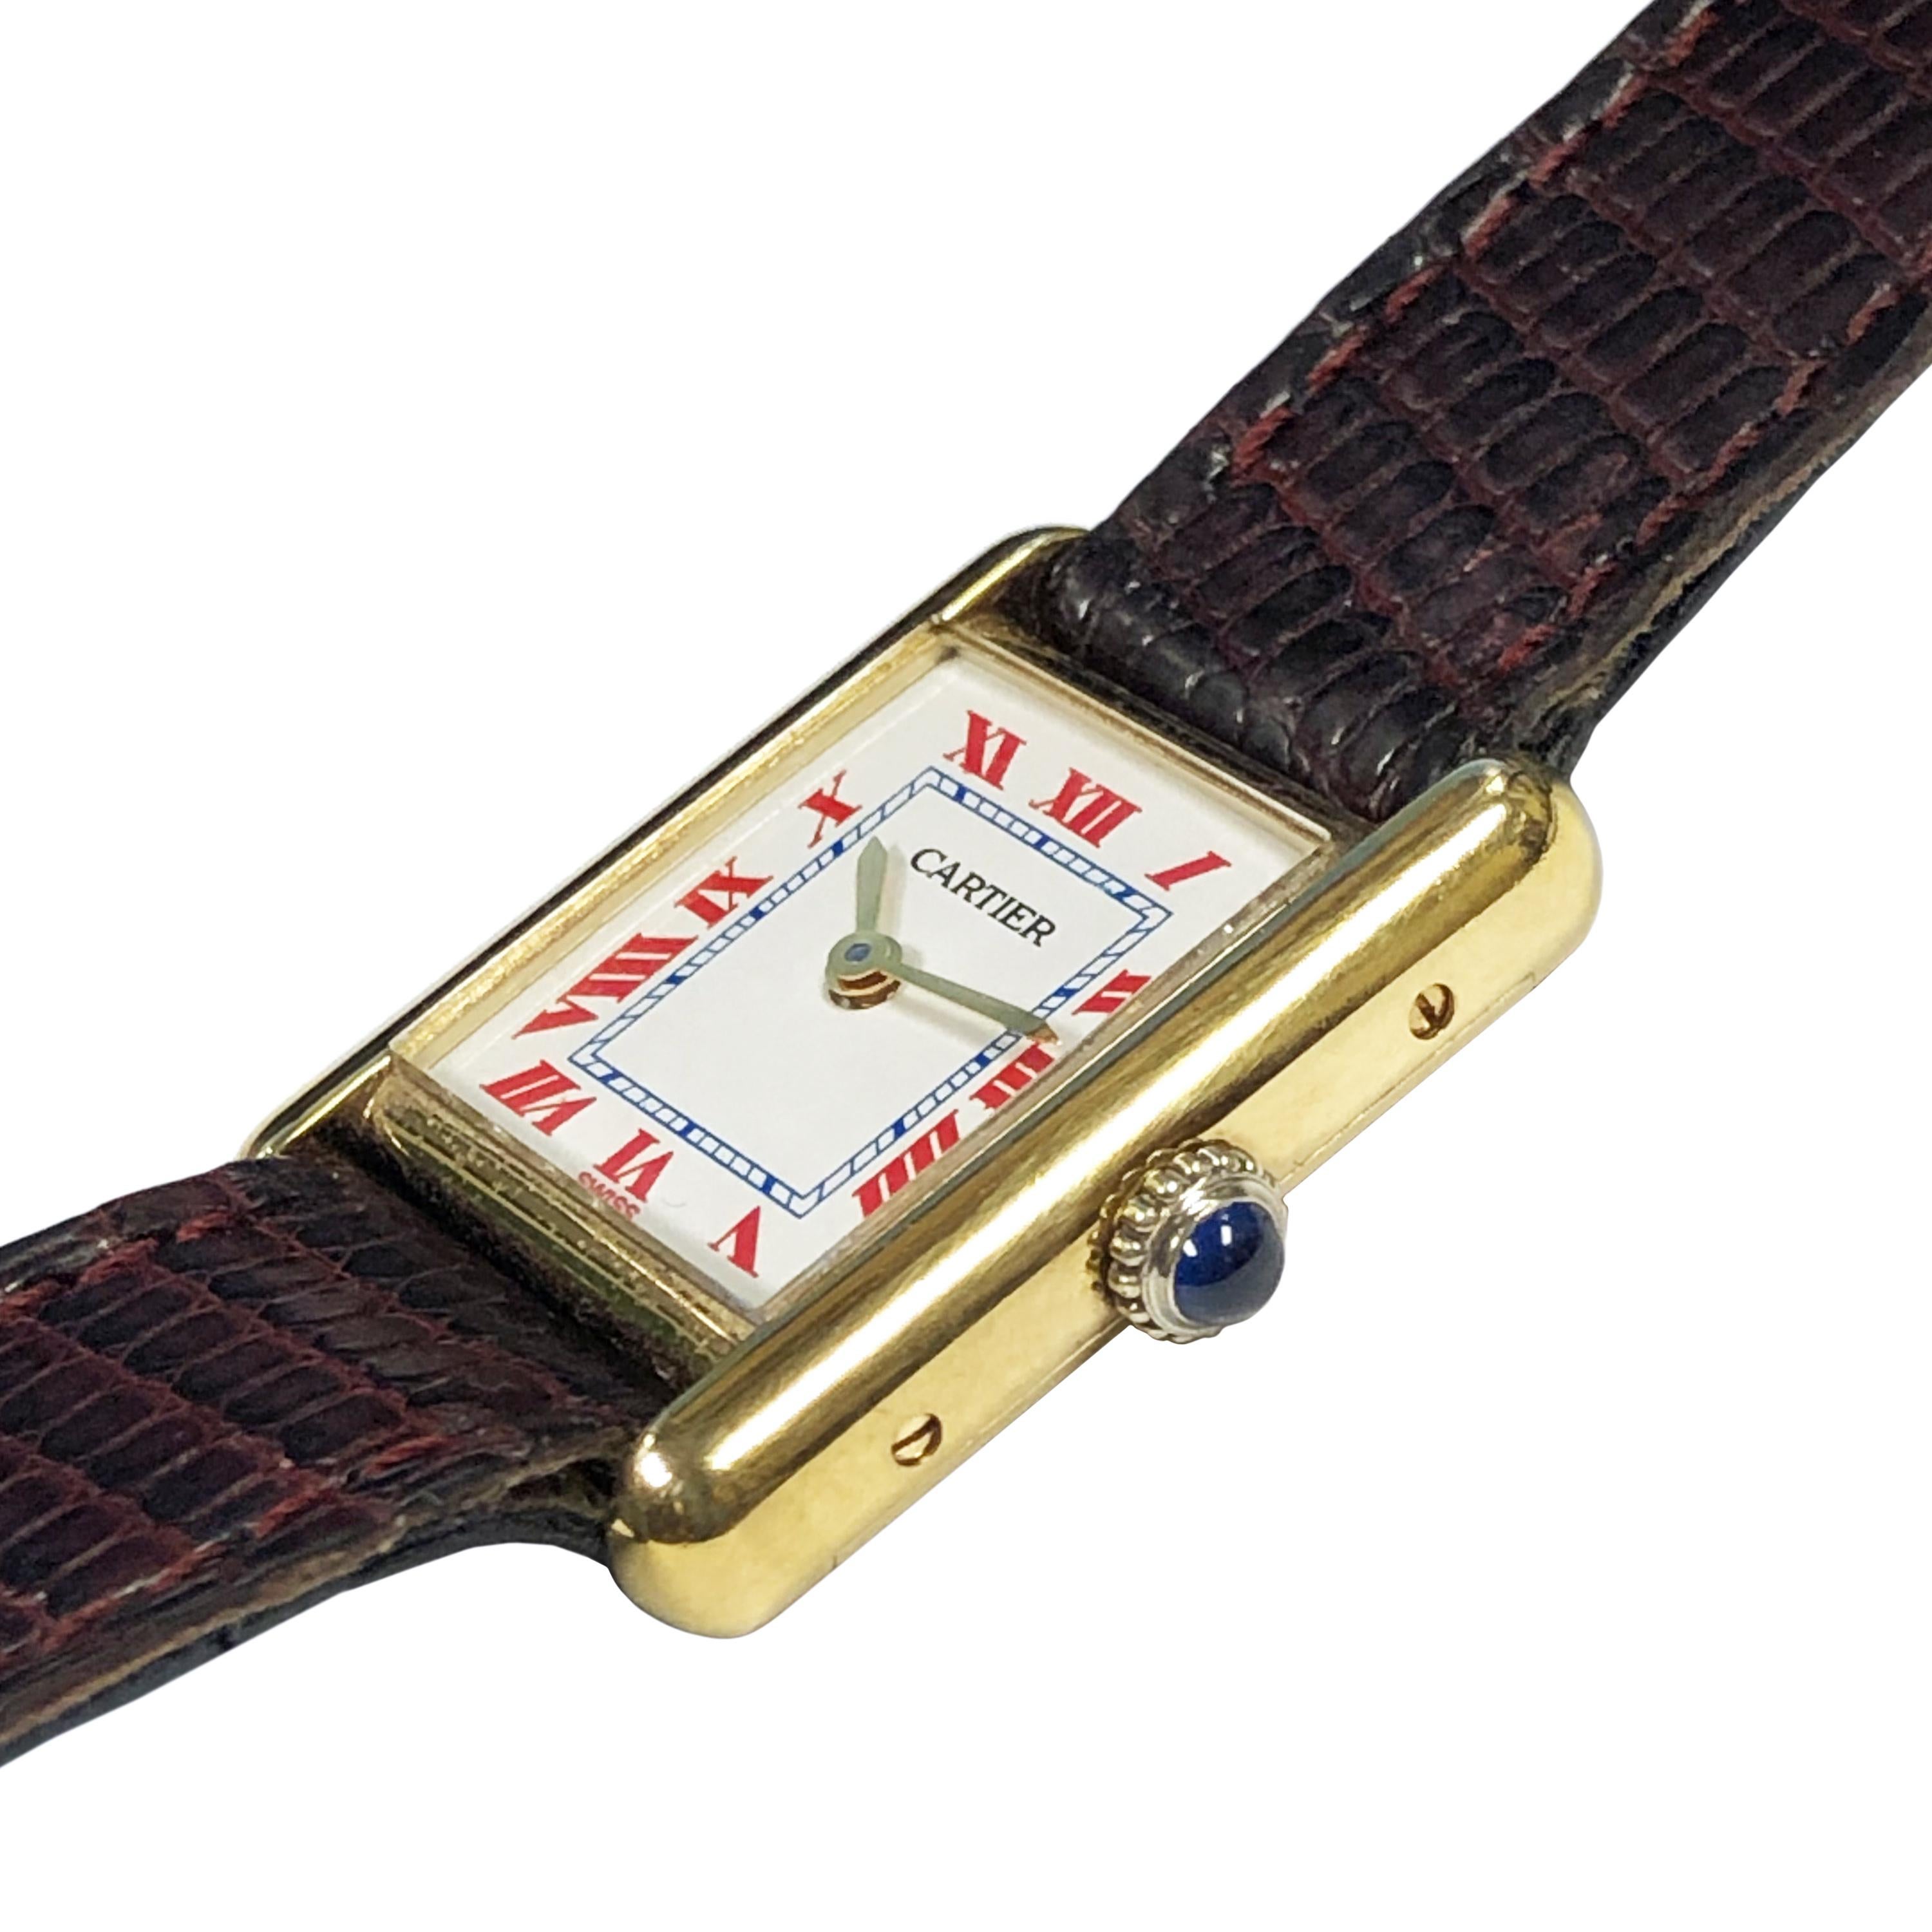 Circa 1990s Cartier Classic Ladies Tank Wrist Watch, 28 X 20 M.M. Vermeil ( Gold plate on Sterling Silver ) 2 piece case, 17 Jewel mechanical, manual wind movement and a Sapphire Crown. Custom White Dial with red Roman Numerals and a Blue inner